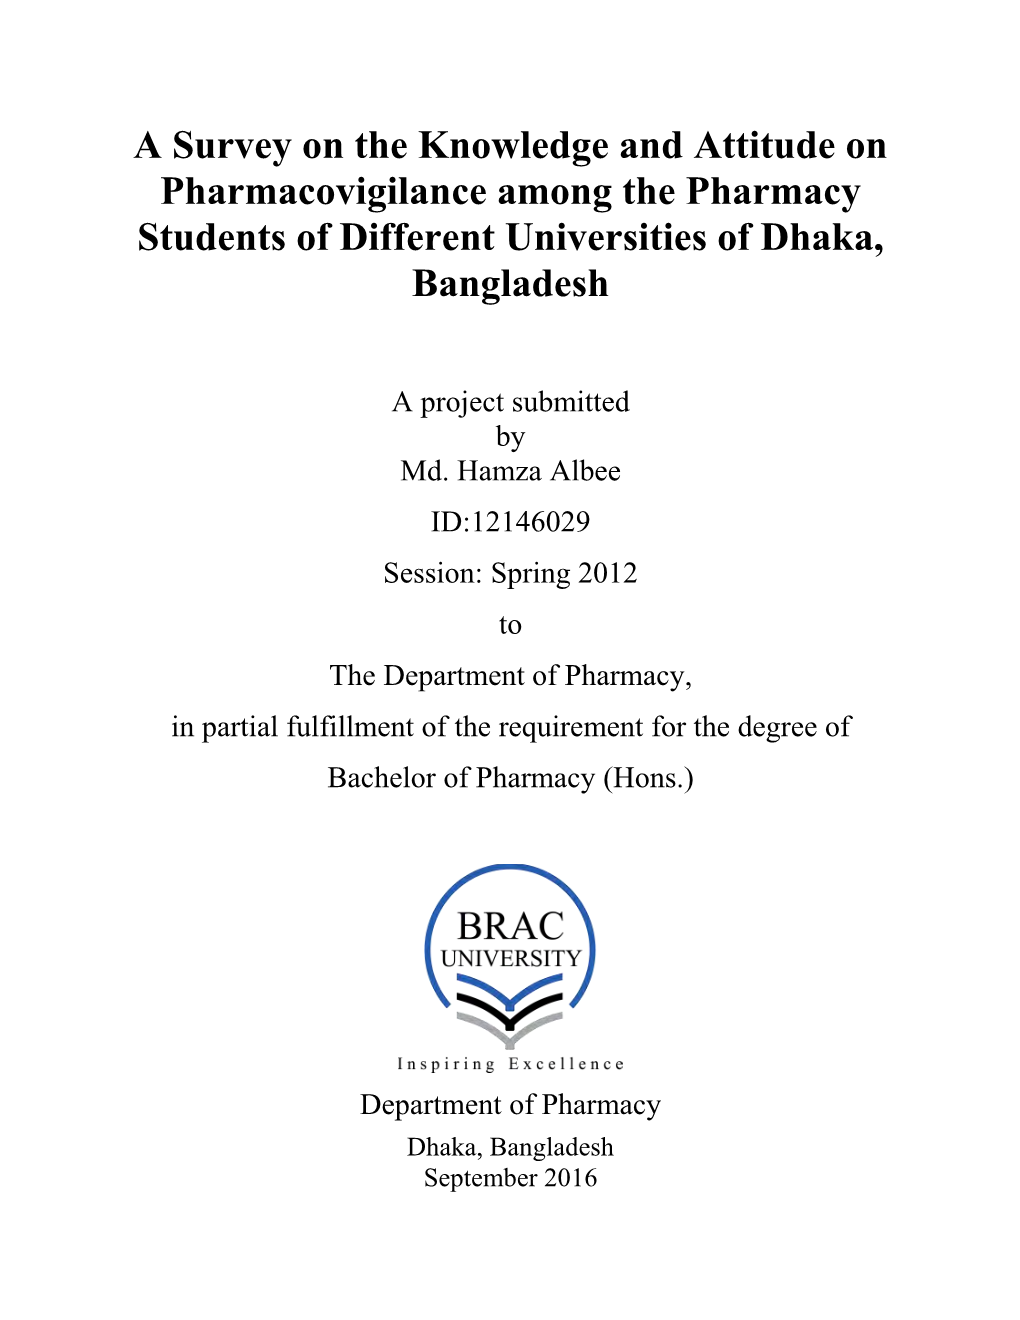 A Survey on the Knowledge and Attitude on Pharmacovigilance Among the Pharmacy Students of Different Universities of Dhaka, Bangladesh